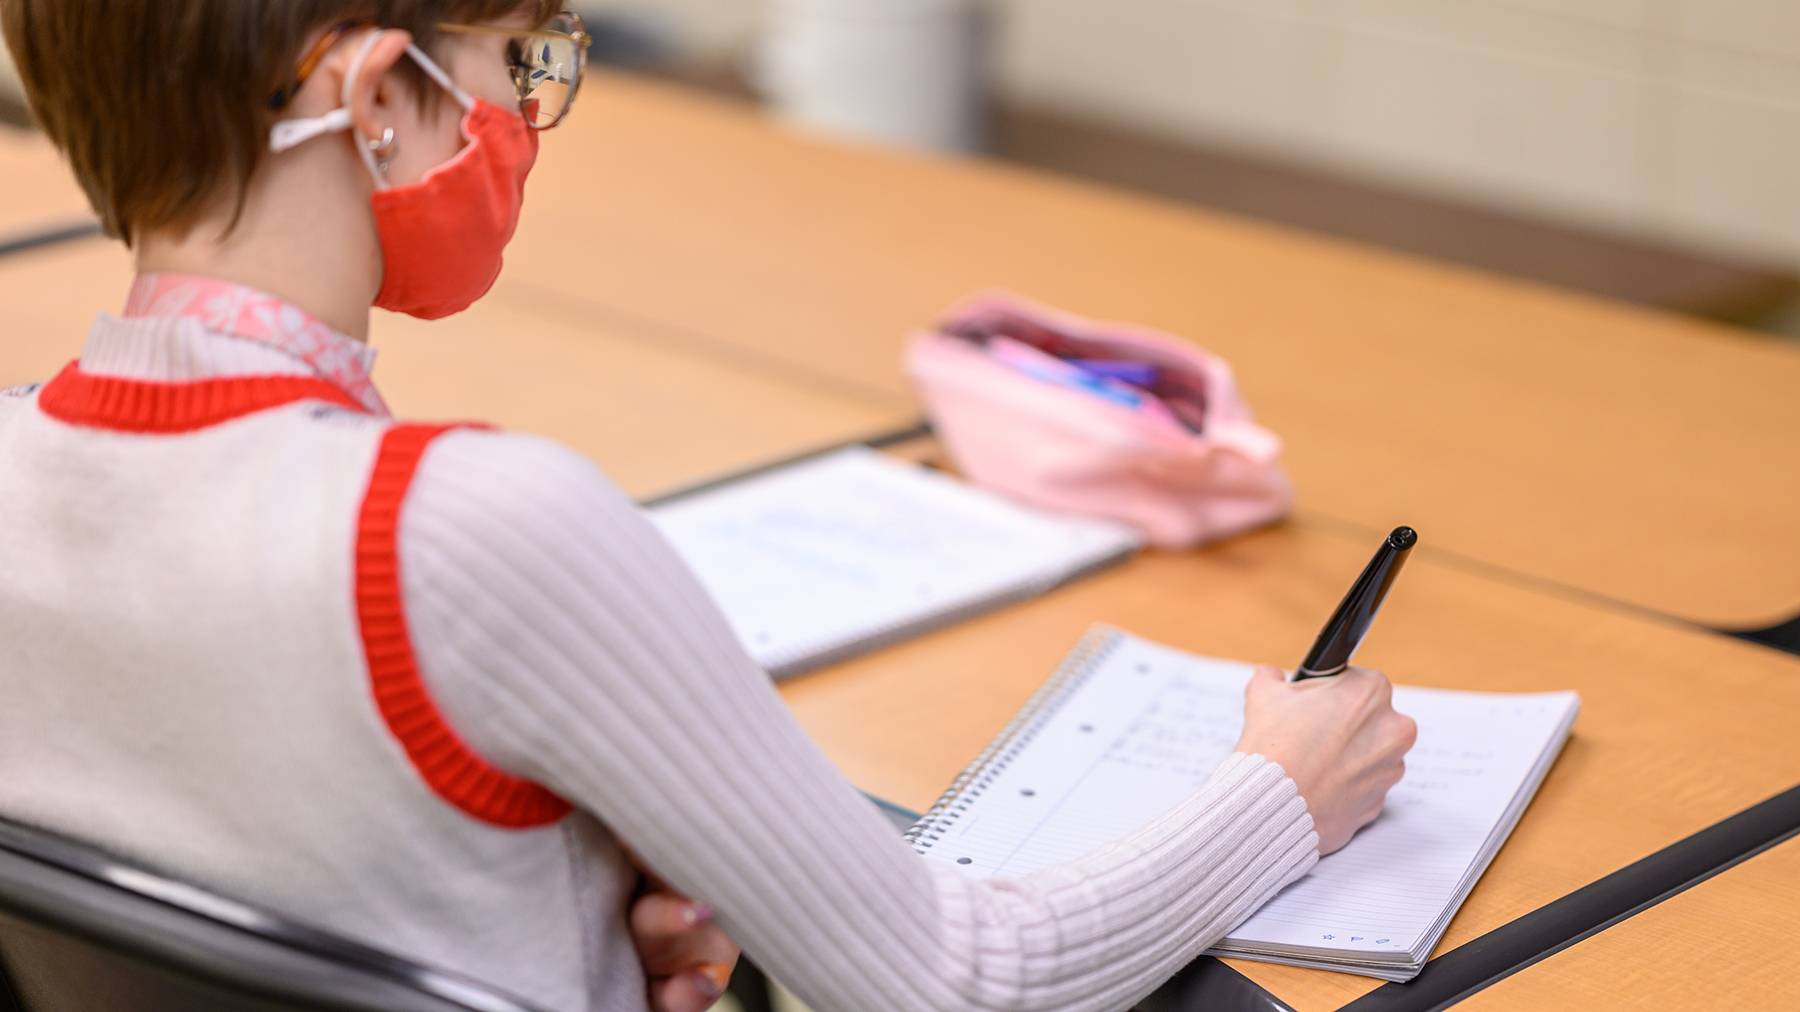 A student wearing a red face mask taking notes while sitting at a classroom desk.